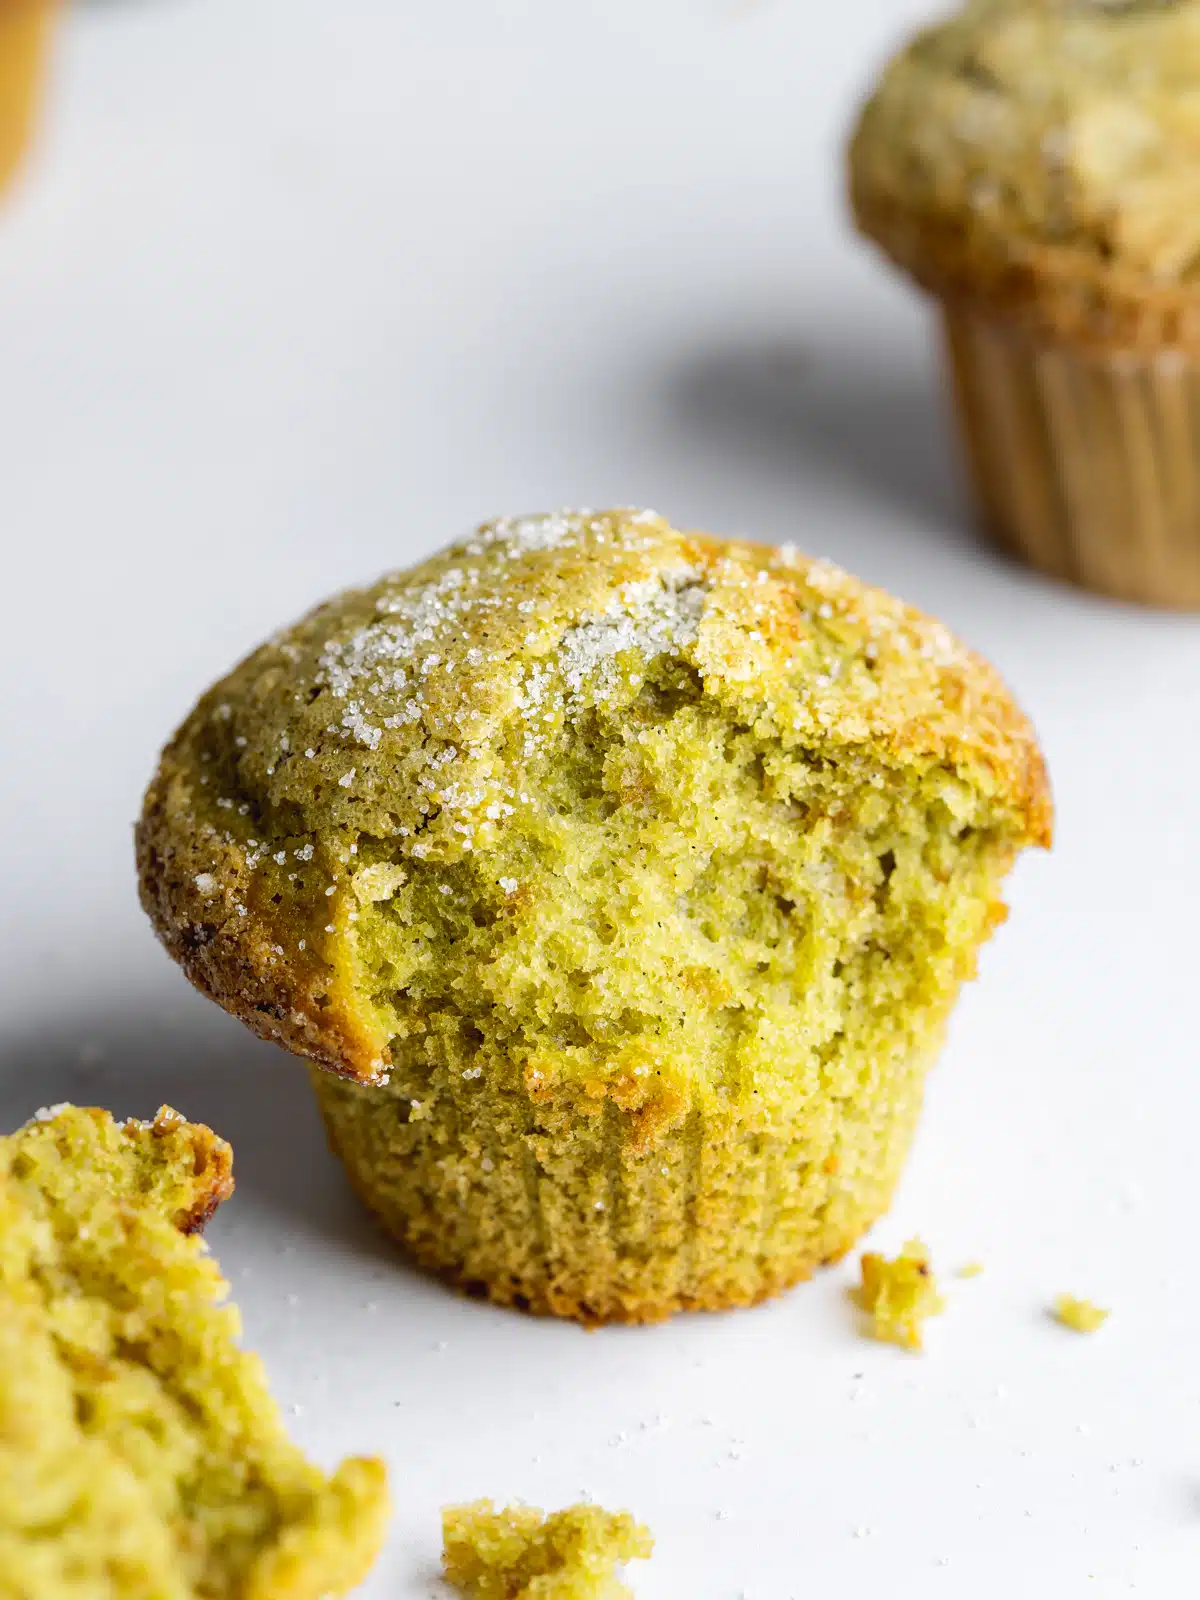 Close-up of a vegan green tea muffin with a dusting of powdered sugar, with another muffin and crumbs in the background.